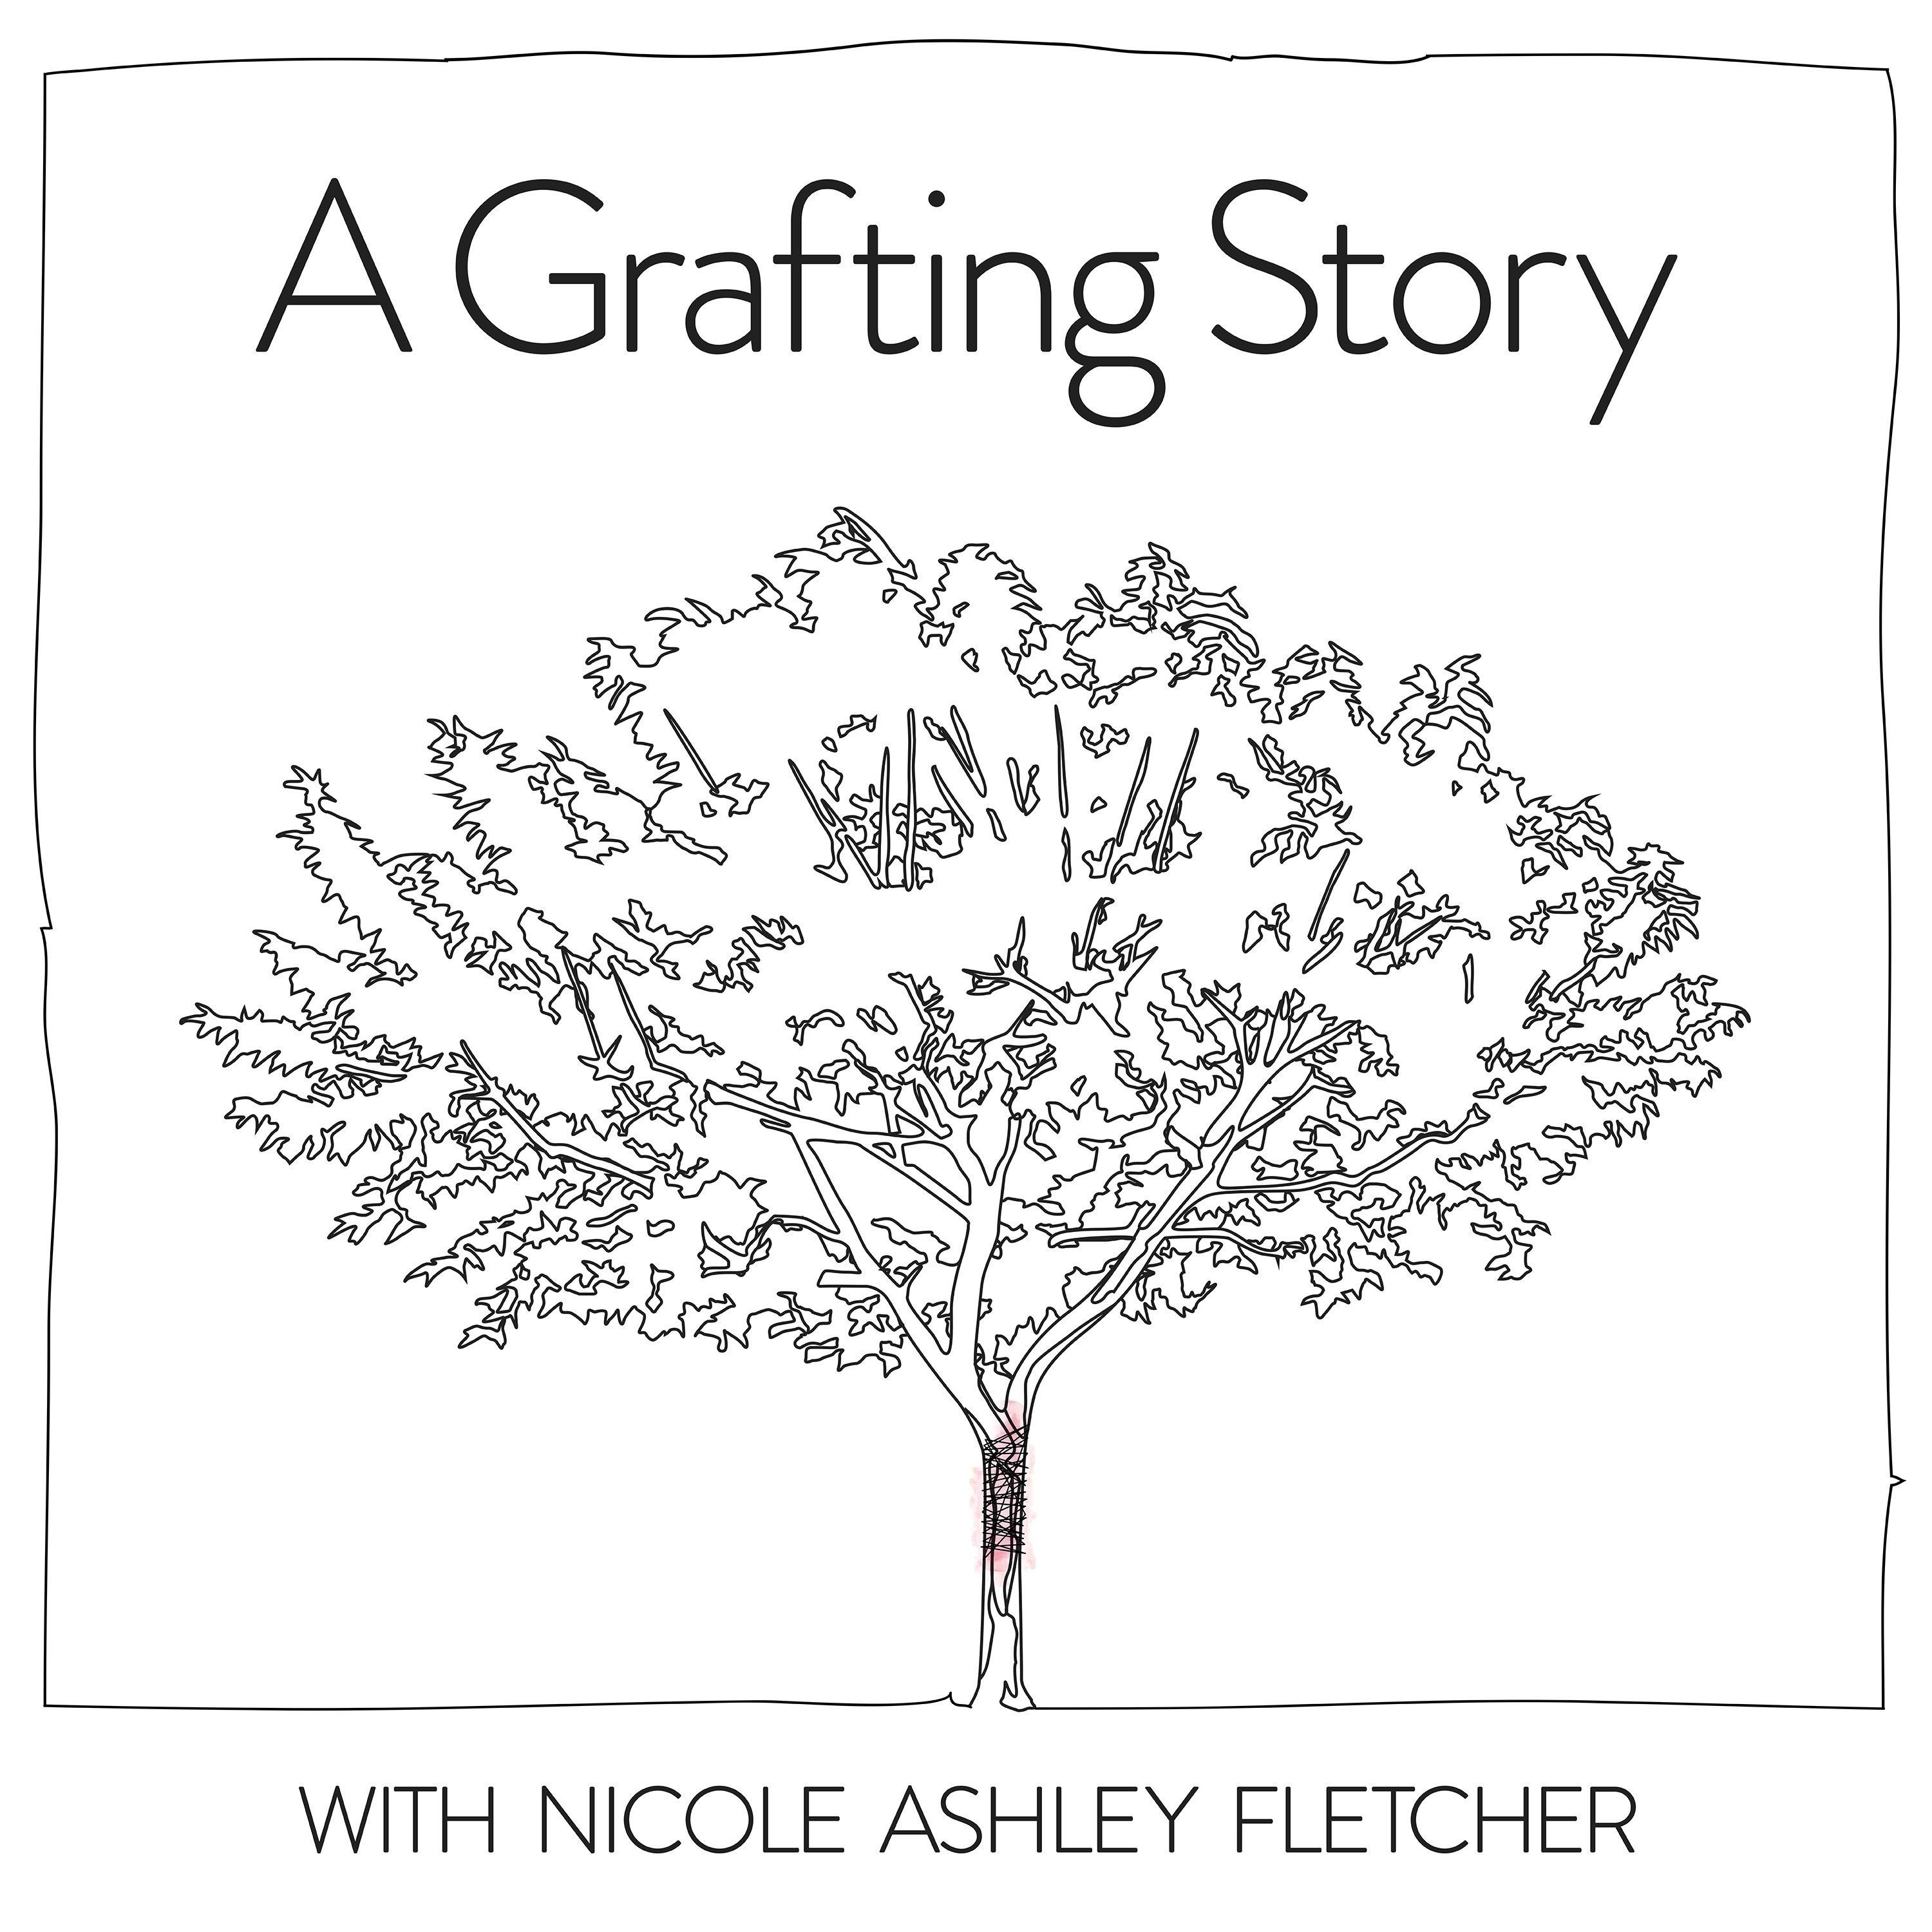 A Grafting Story